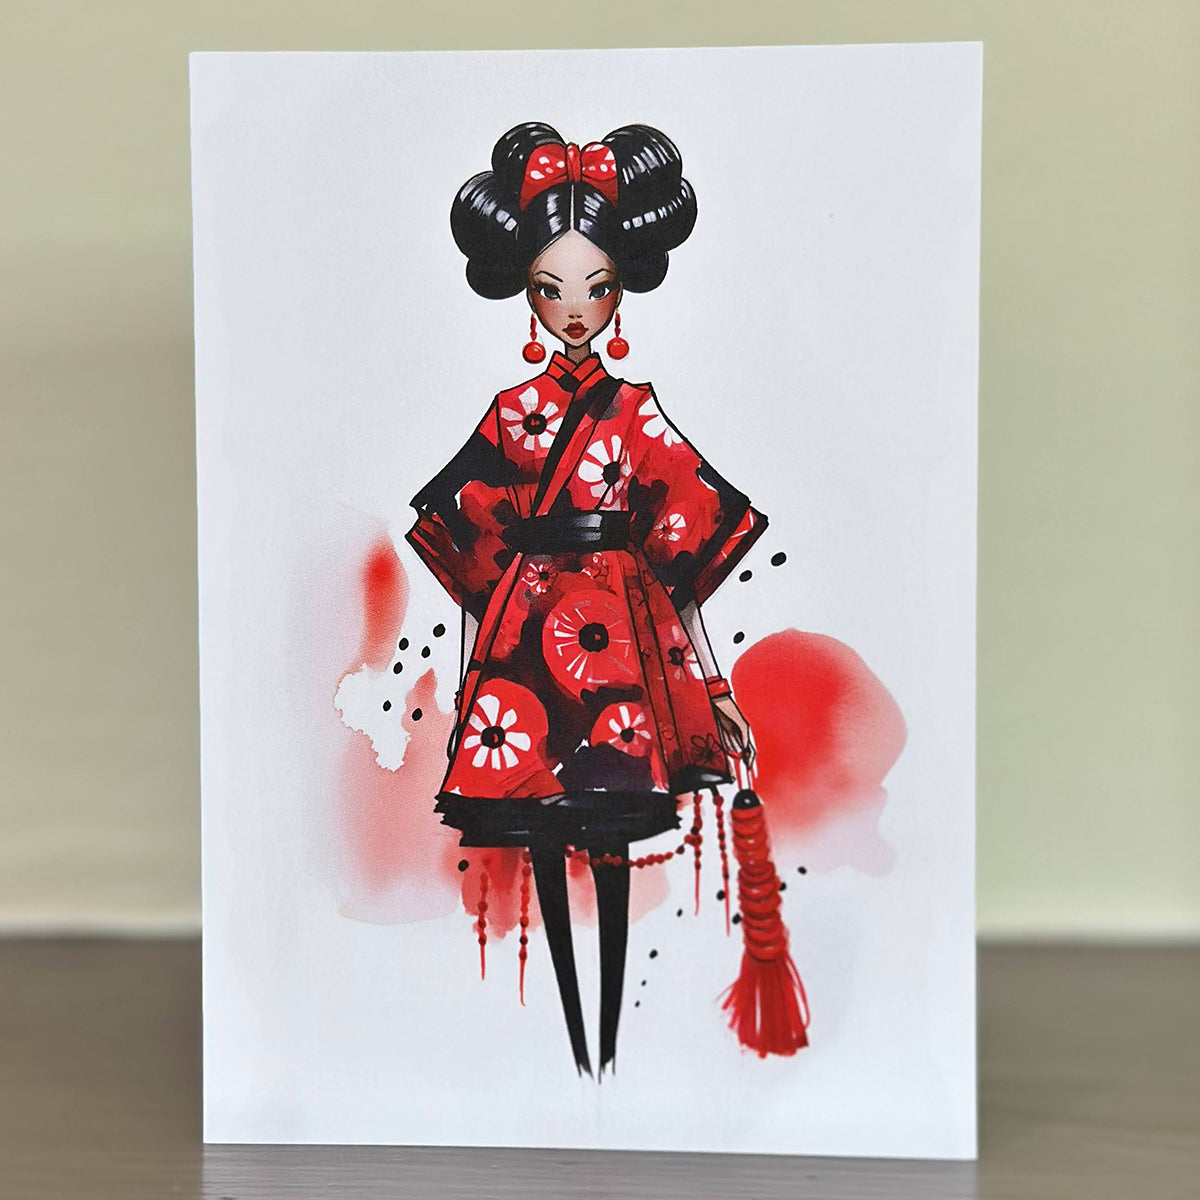 A Sweet Seasons greetings card, featuring a charming image of a girl wearing red